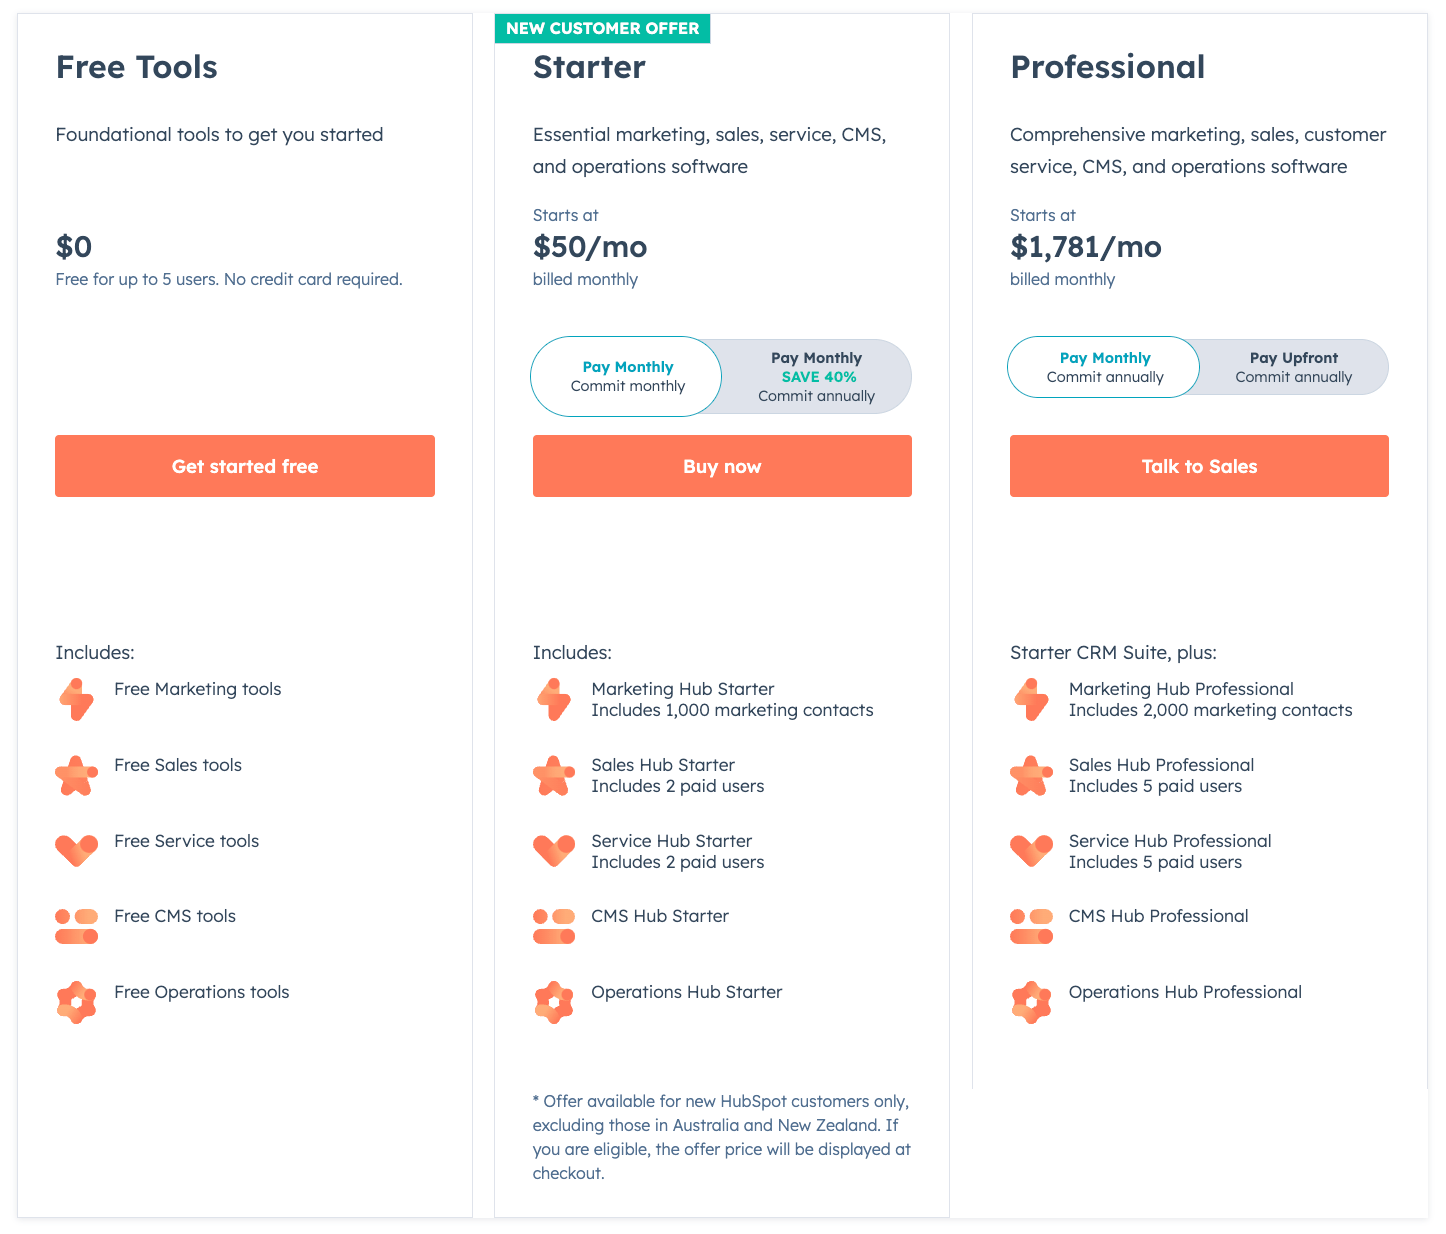 30+ Best SaaS Tools to Help Your Small Business Increase Sales in 2023